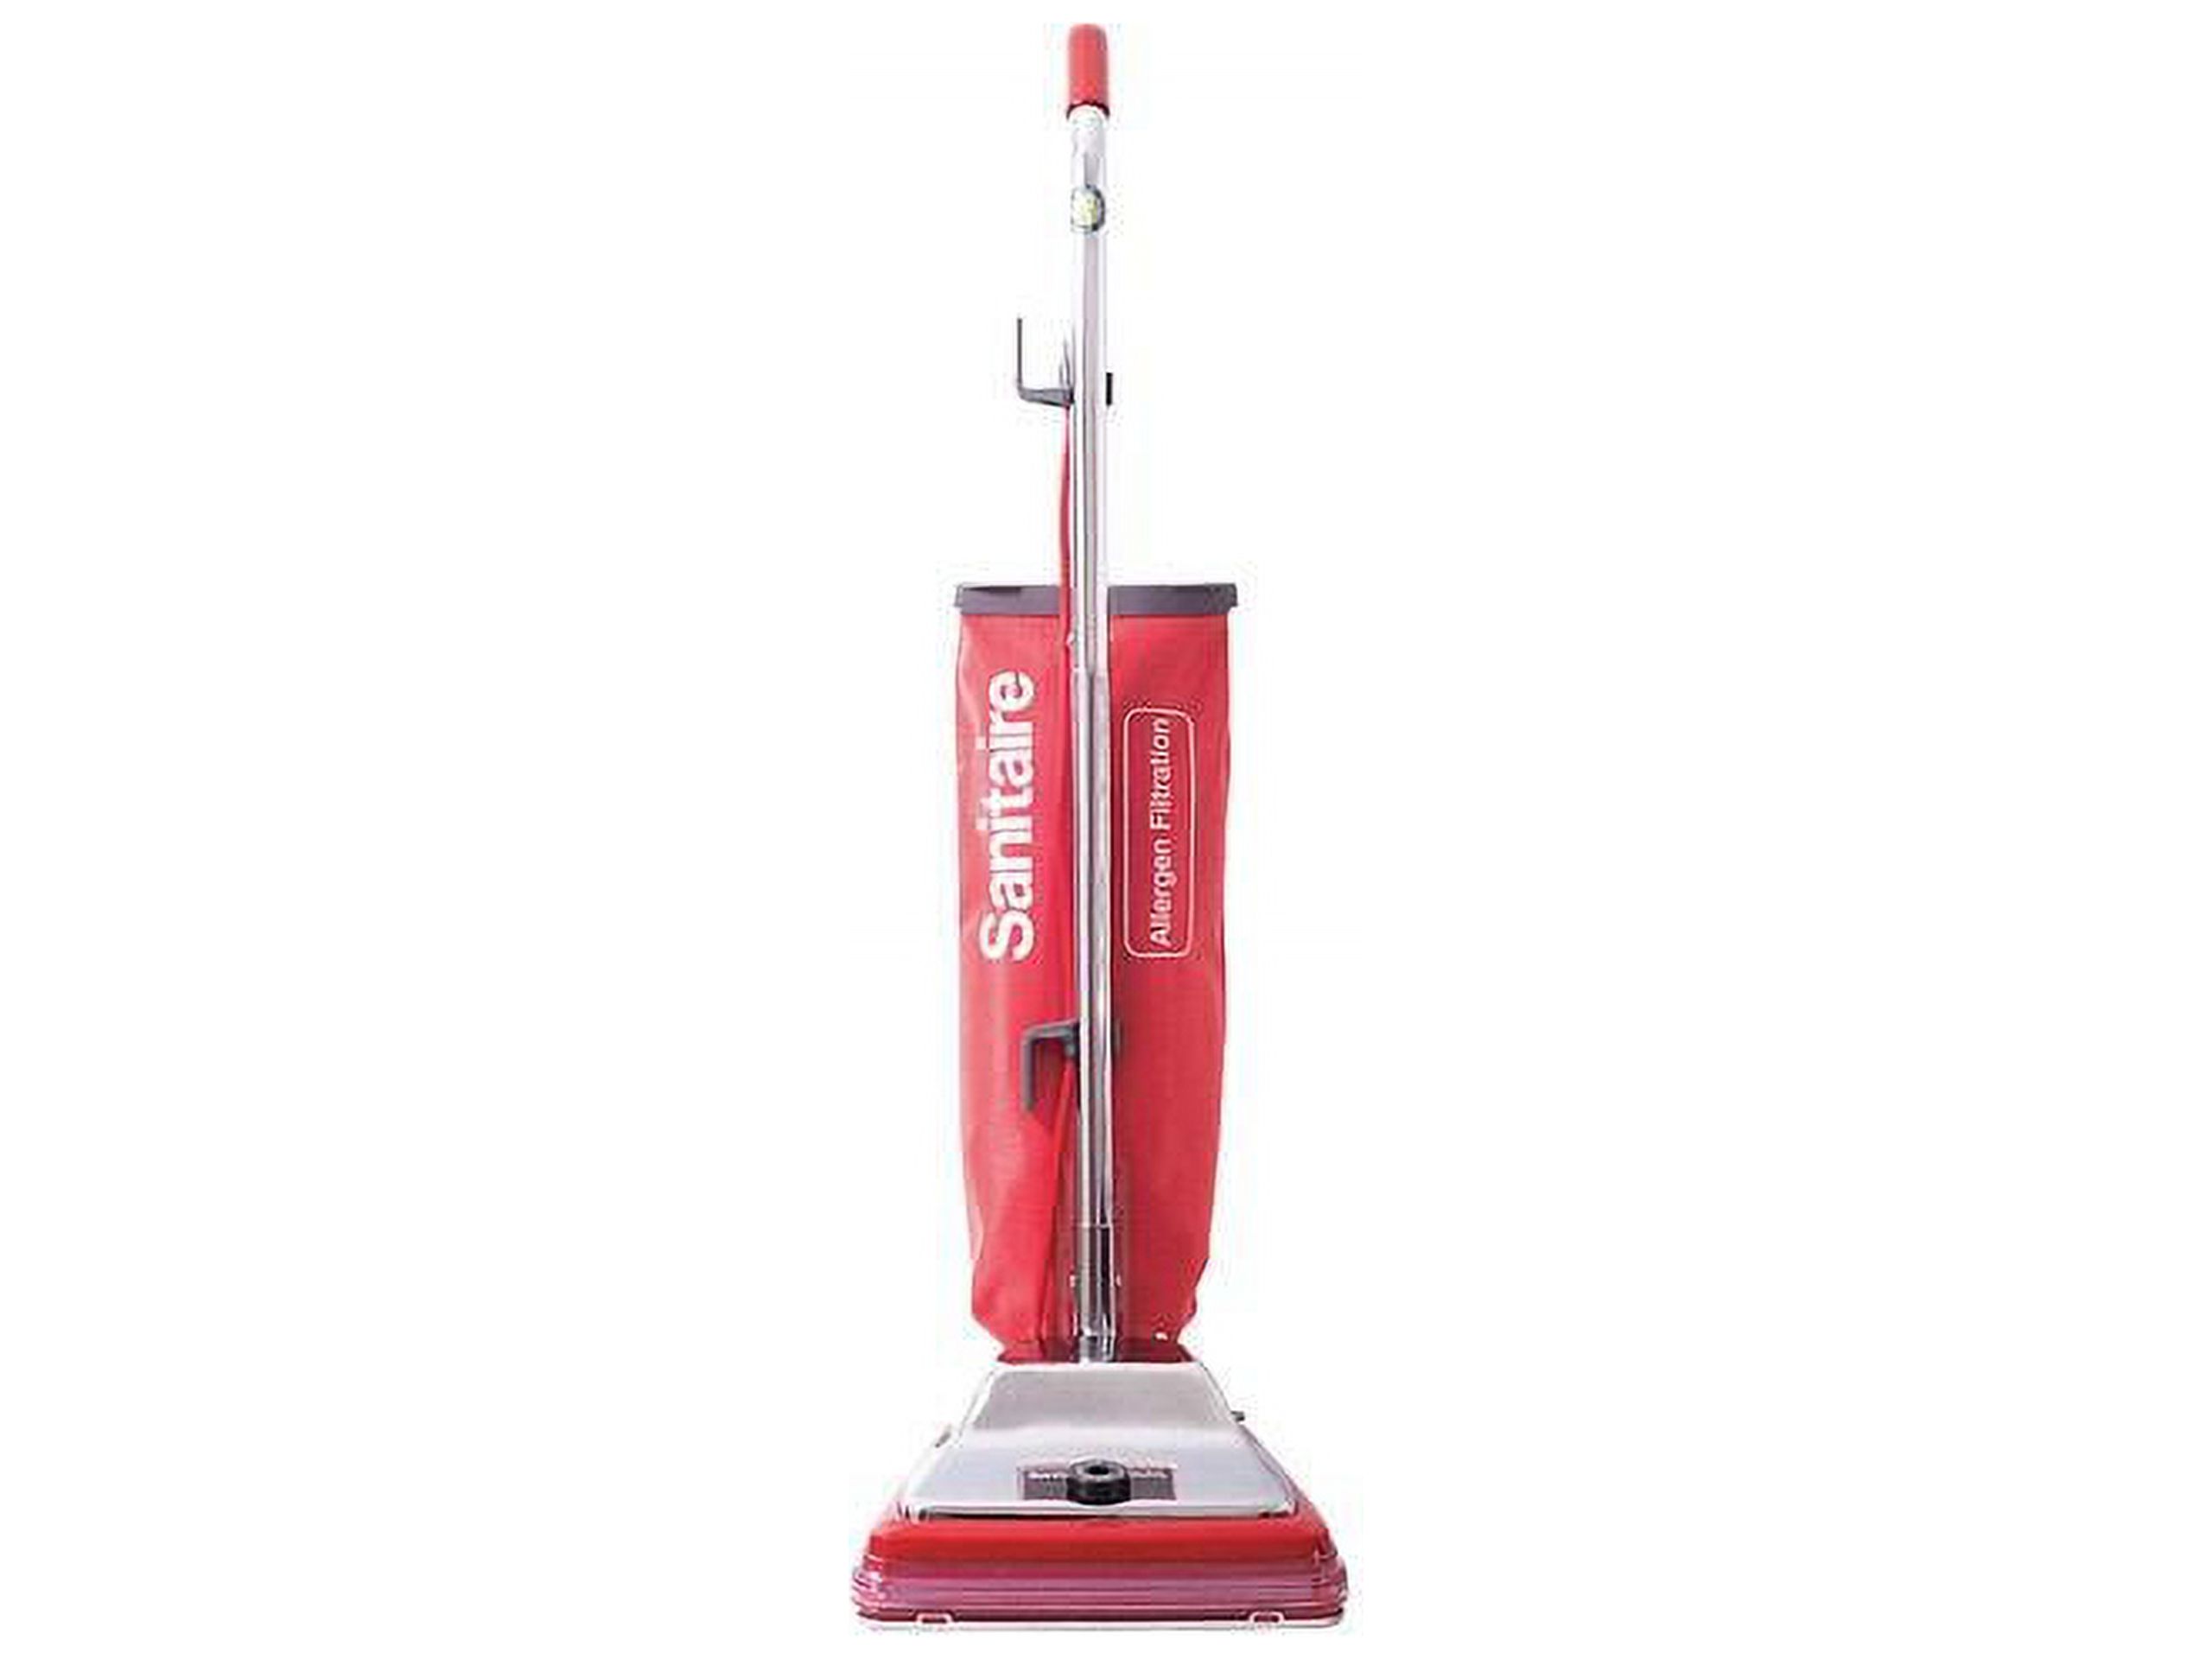 Sanitaire Tradition Bagged Upright Vacuum Cleaner, Red SC888 - image 1 of 2